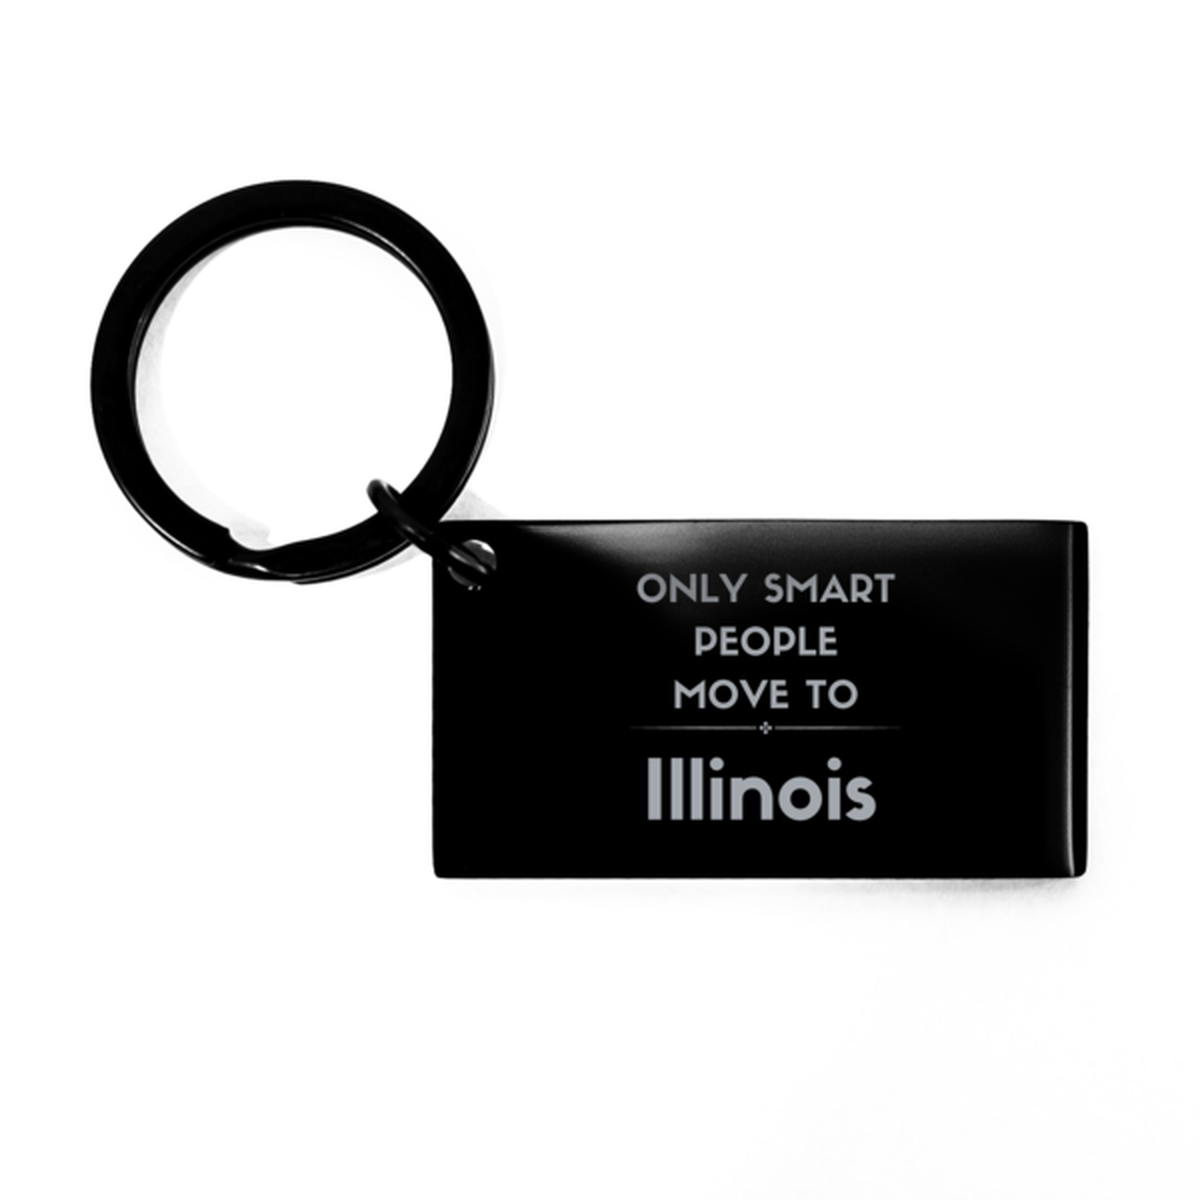 Only smart people move to Illinois Keychain, Gag Gifts For Illinois, Move to Illinois Gifts for Friends Coworker Funny Saying Quote